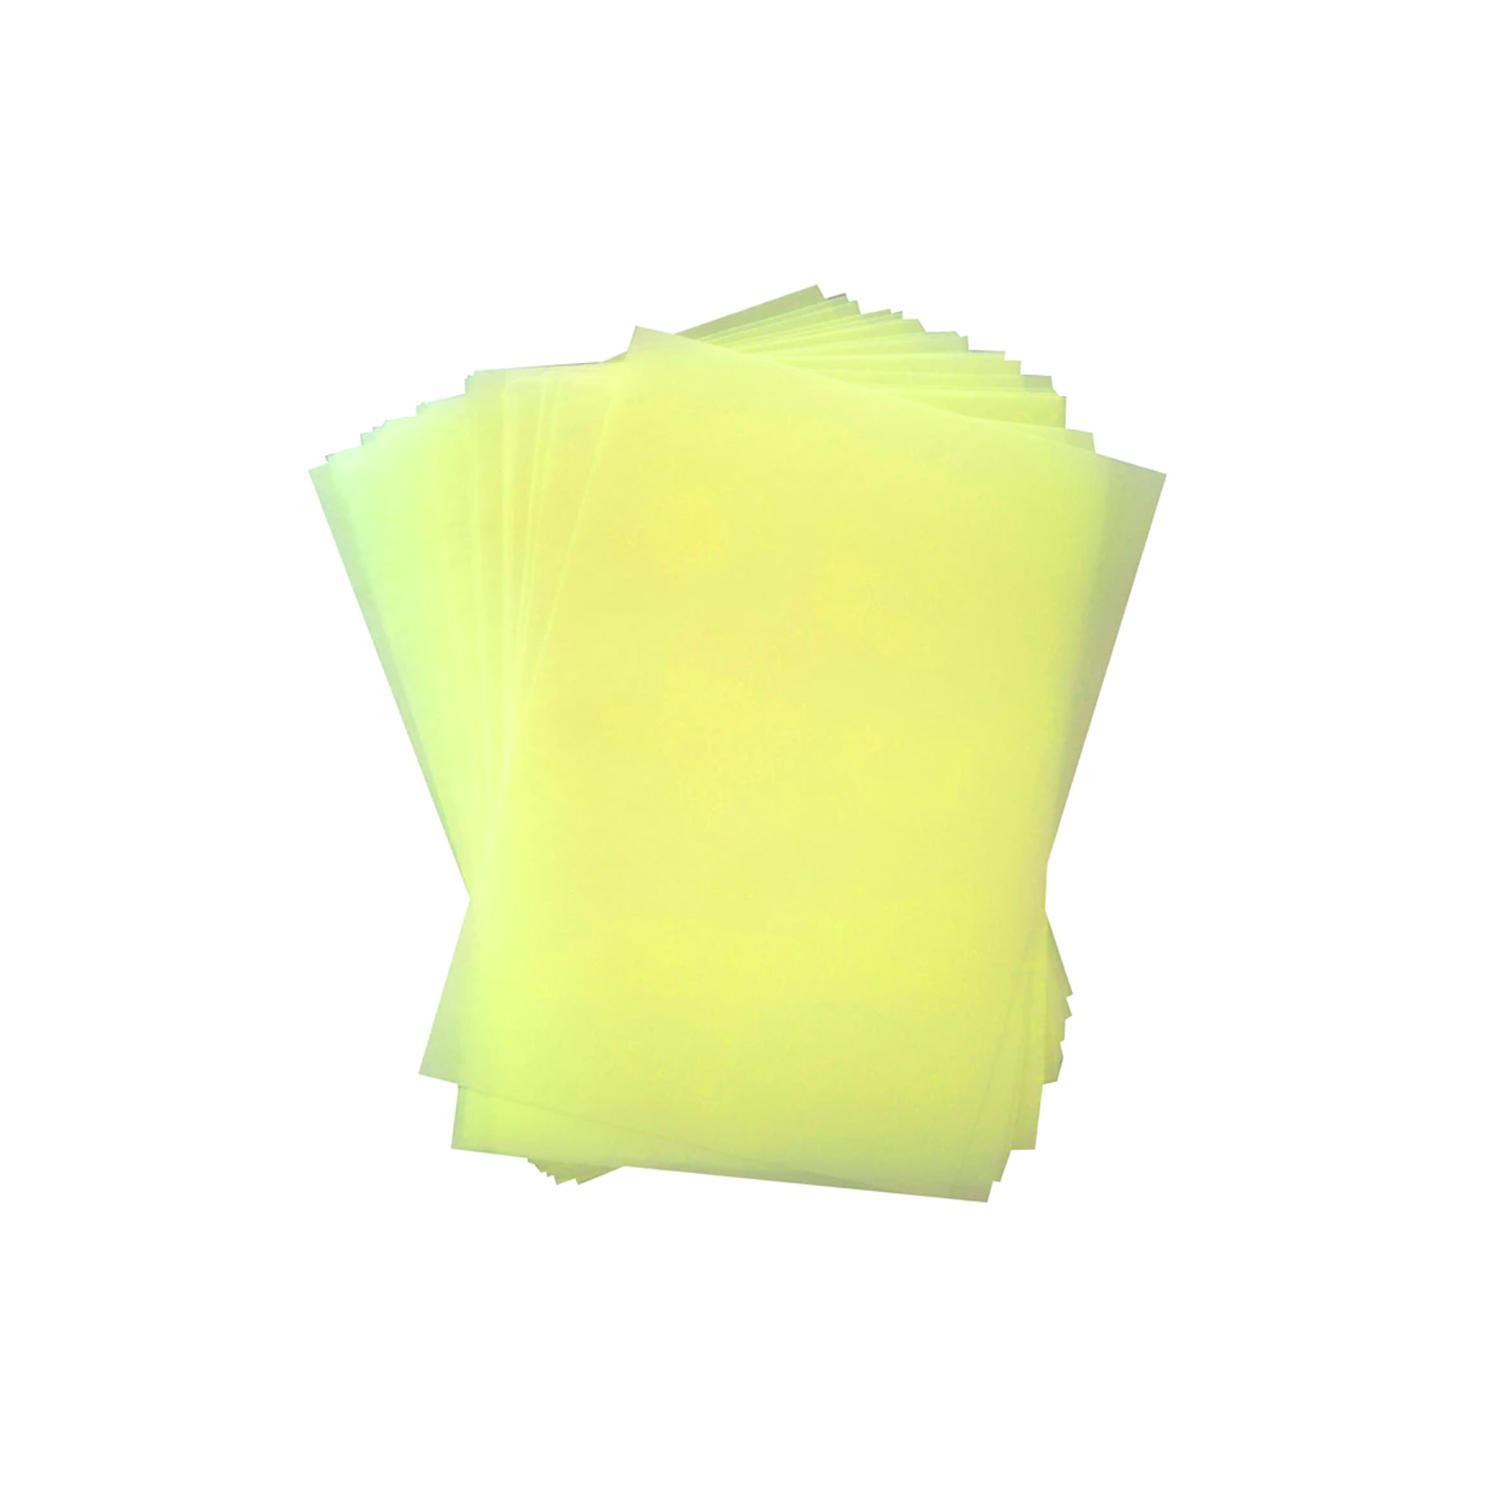 EDIBLE WAFER PAPER A4 YELLOW 25PCS PER PACK